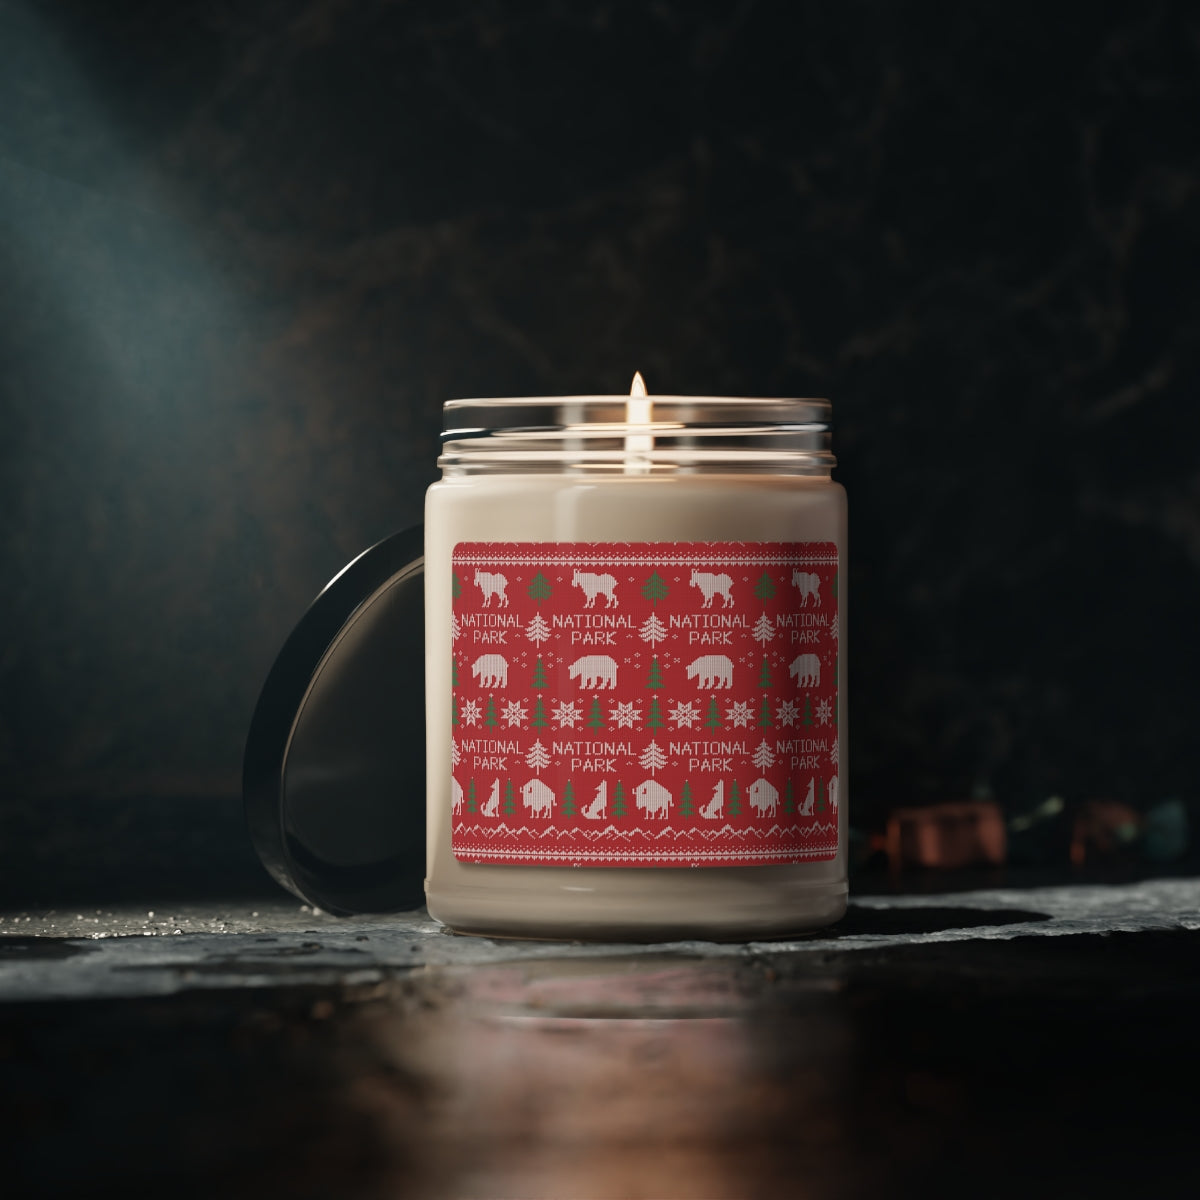 National Park Candle - Fair Isle National Park Pattern